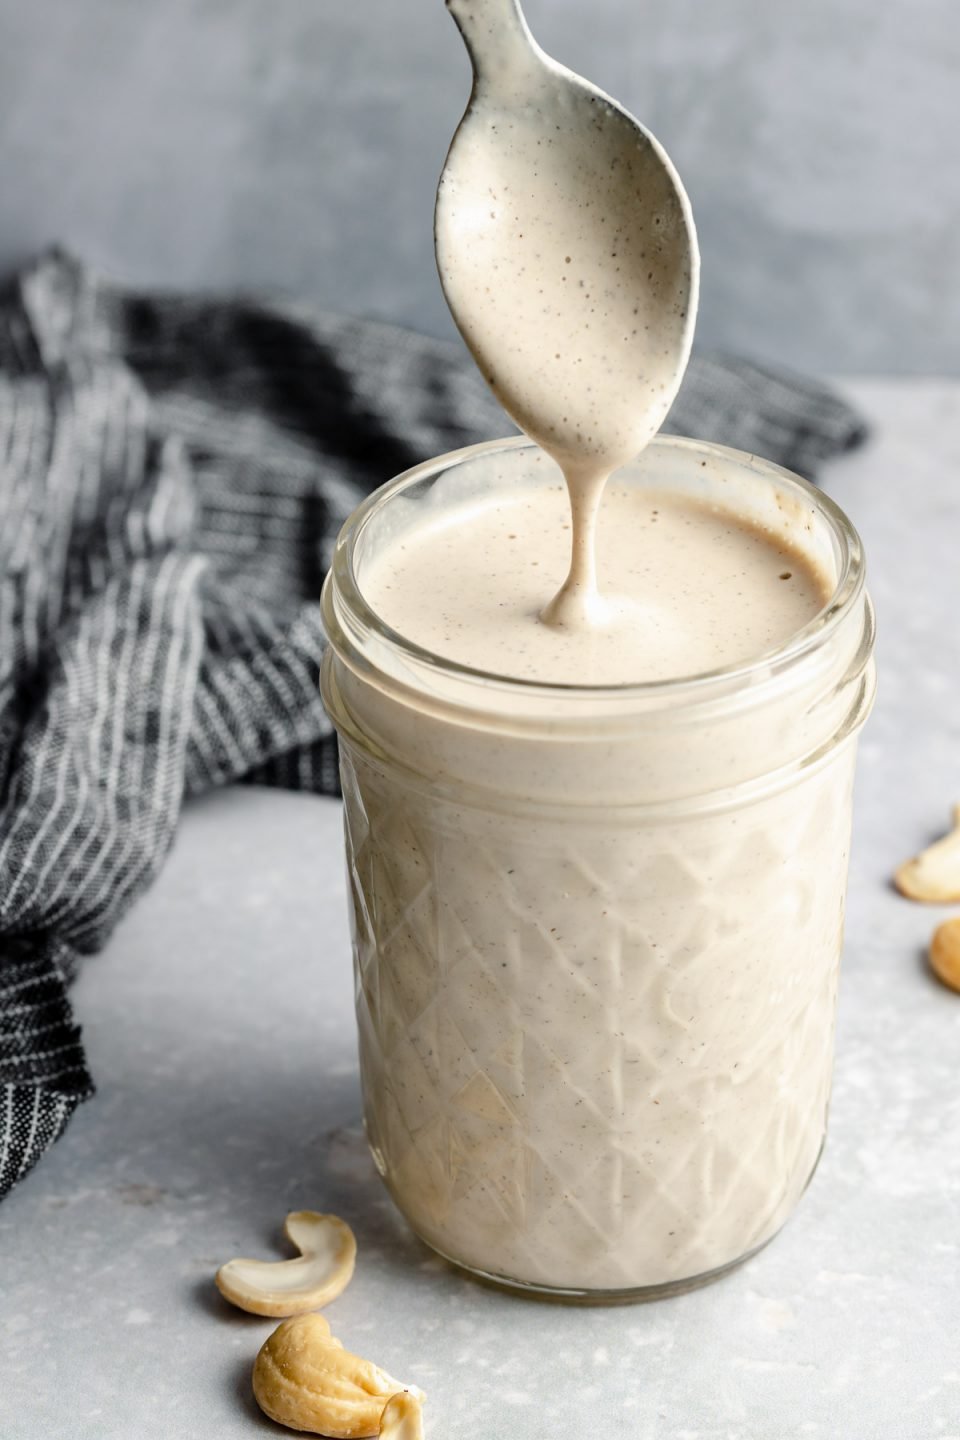 An angled shot of an open mason jar filled with Vegan Cashew Crema sits on top of a light blue surface. A spoon has been dipped into the crema and is being pulled out covered in the tan-colored creamy sauce & falling off the spoon back into the mason jar. A blue & white striped linen napkin rests on the surface in the background & raw cashews surround the jar of crema.